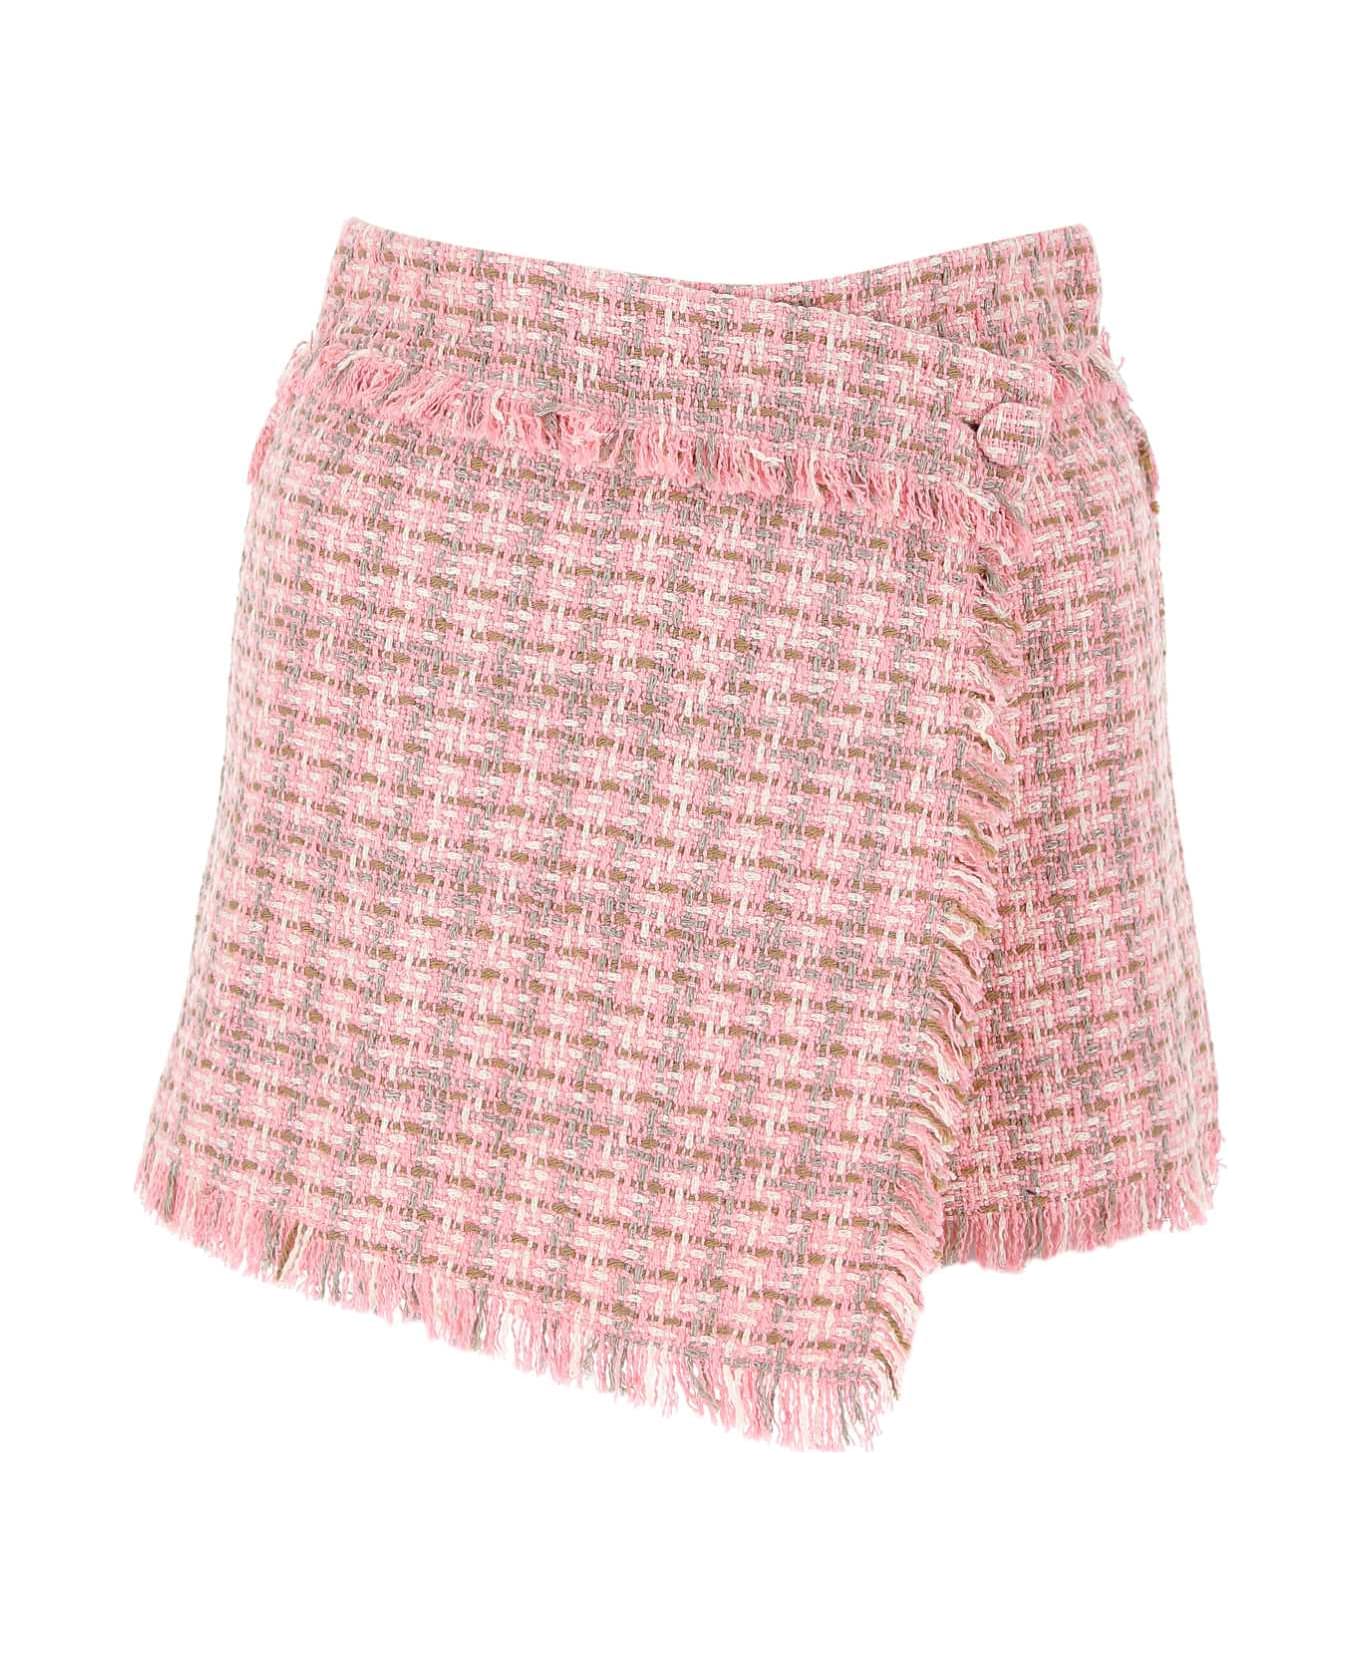 MSGM Multicolor Tweed Shorts - PINK